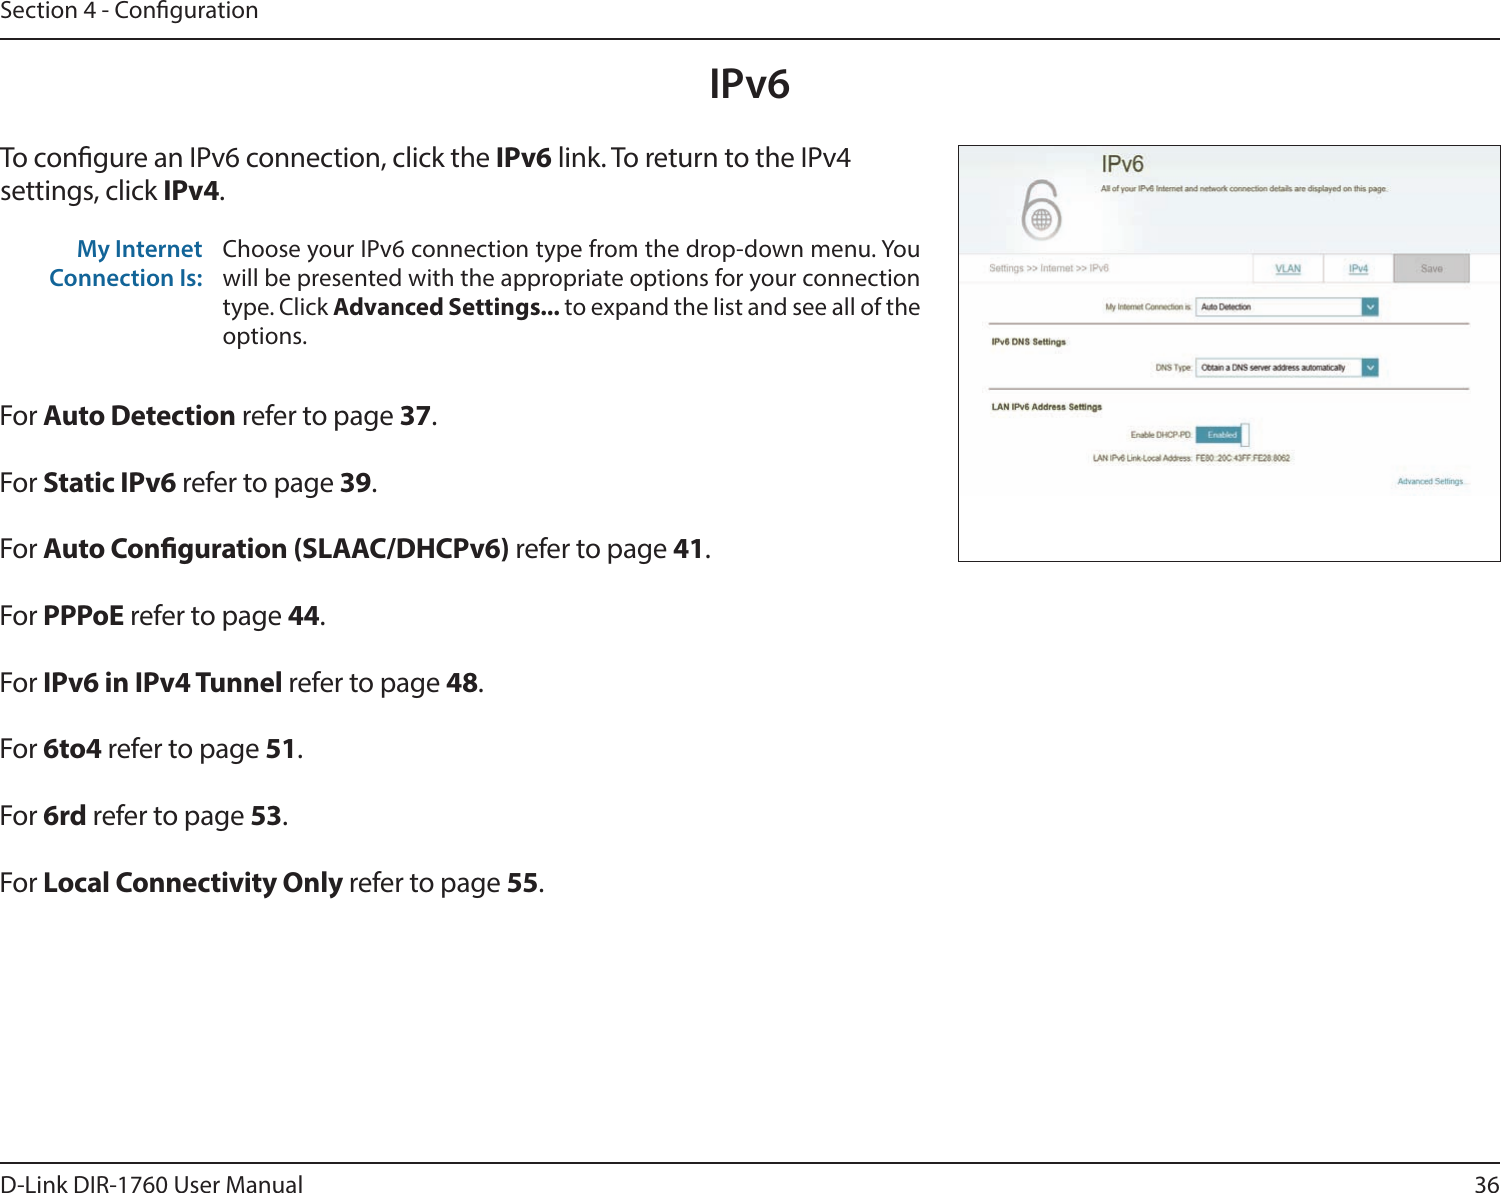 36D-Link DIR-1760 User ManualSection 4 - CongurationIPv6To congure an IPv6 connection, click the IPv6 link. To return to the IPv4 settings, click IPv4.For Auto Detection refer to page 37.For Static IPv6 refer to page 39.For Auto Conguration (SLAAC/DHCPv6) refer to page 41.For PPPoE refer to page 44.For IPv6 in IPv4 Tunnel refer to page 48.For 6to4 refer to page 51.For 6rd refer to page 53.For Local Connectivity Only refer to page 55.My Internet Connection Is:Choose your IPv6 connection type from the drop-down menu. You will be presented with the appropriate options for your connection type. Click Advanced Settings... to expand the list and see all of the options.